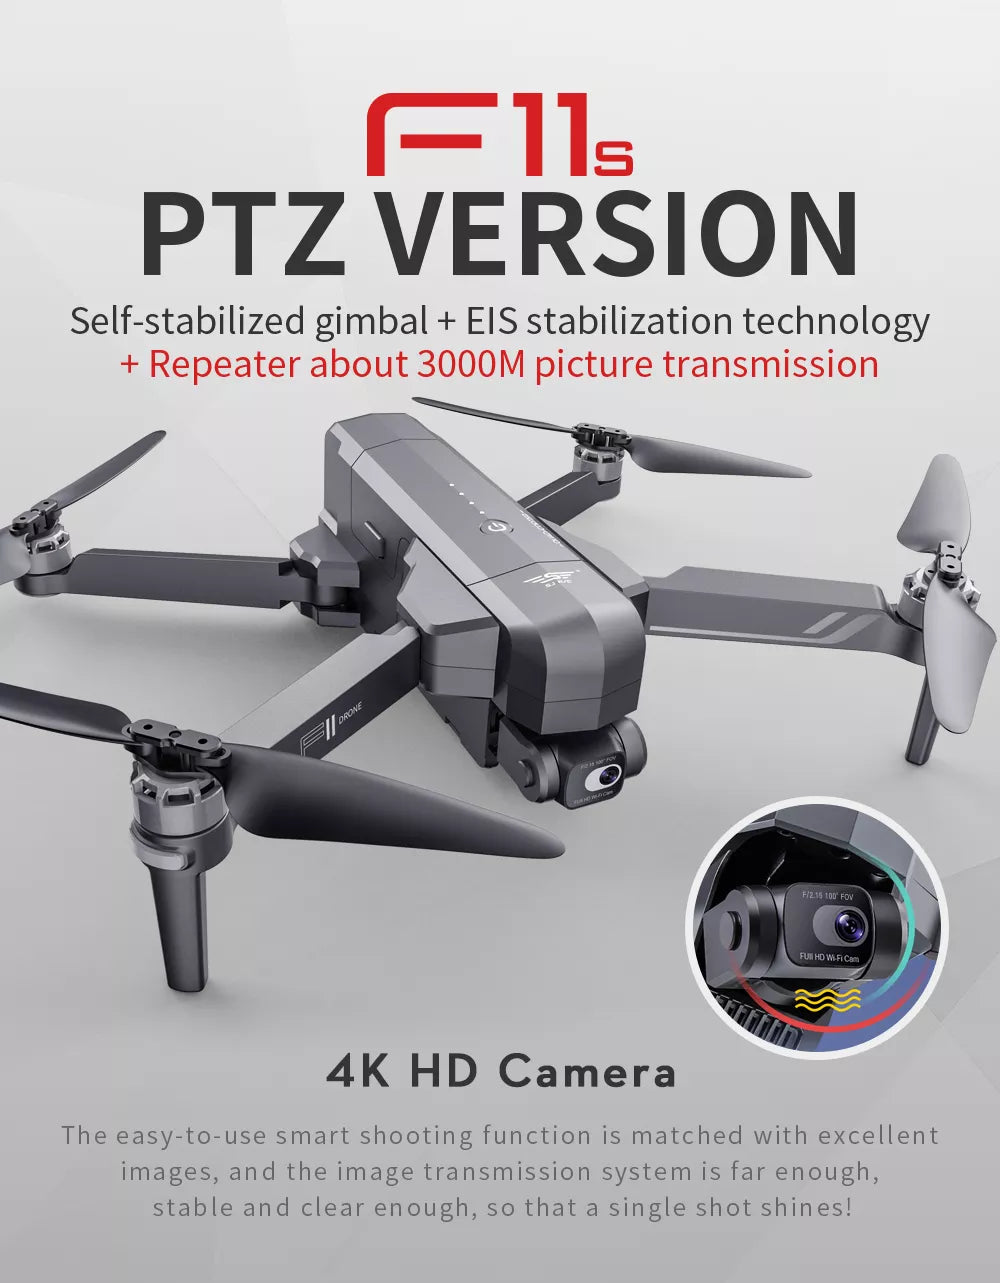 SJRC F11S 4K HD PRO Drone, 4K HD Camera The easy-to-use smart shooting function is matched with excellent images